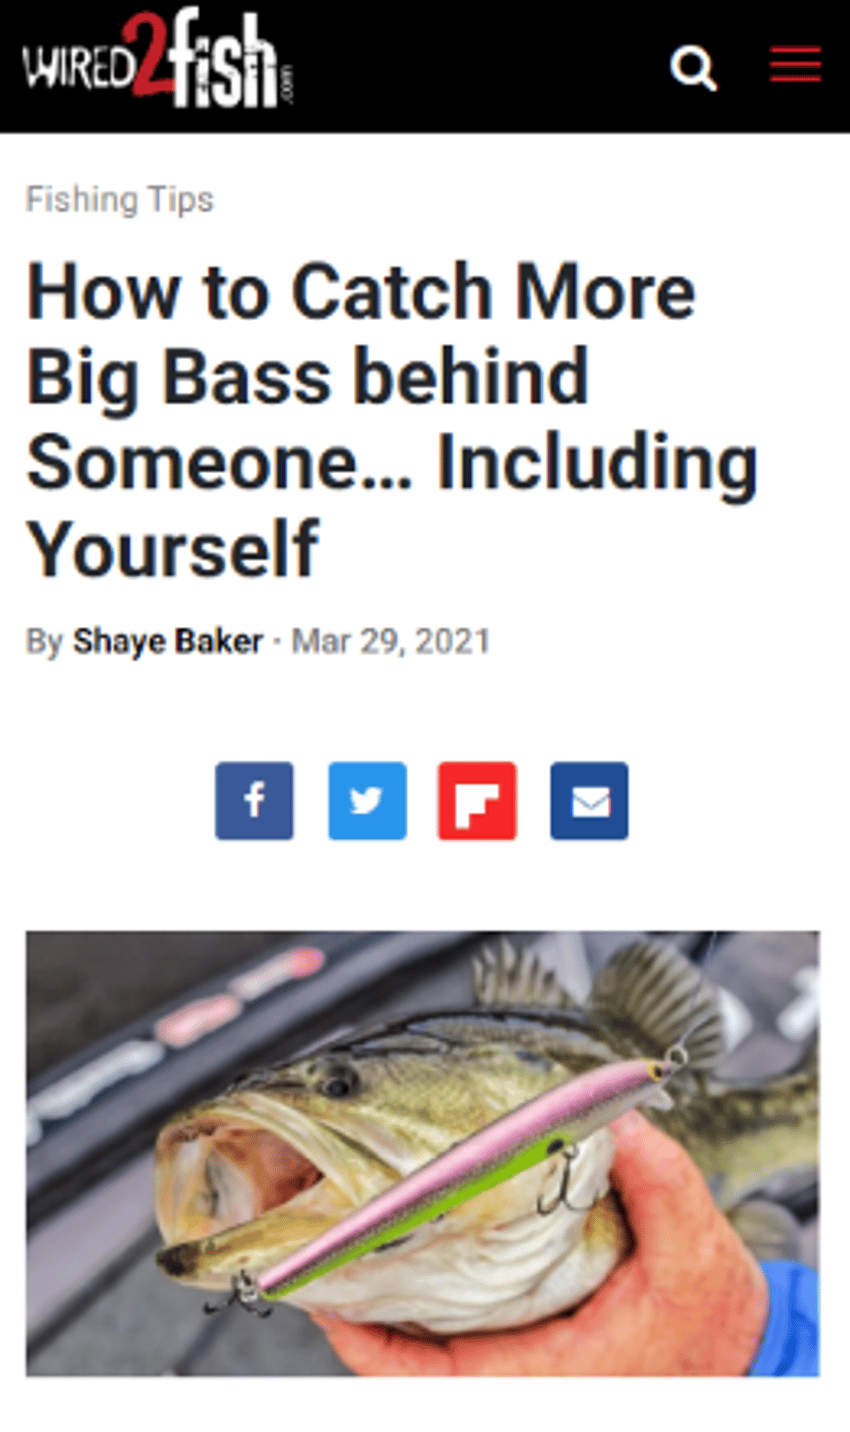 check out the full post [here](https://www.wired2fish.com/fishing-tips/how-to-catch-more-big-bass-behind-someone-including-yourself)